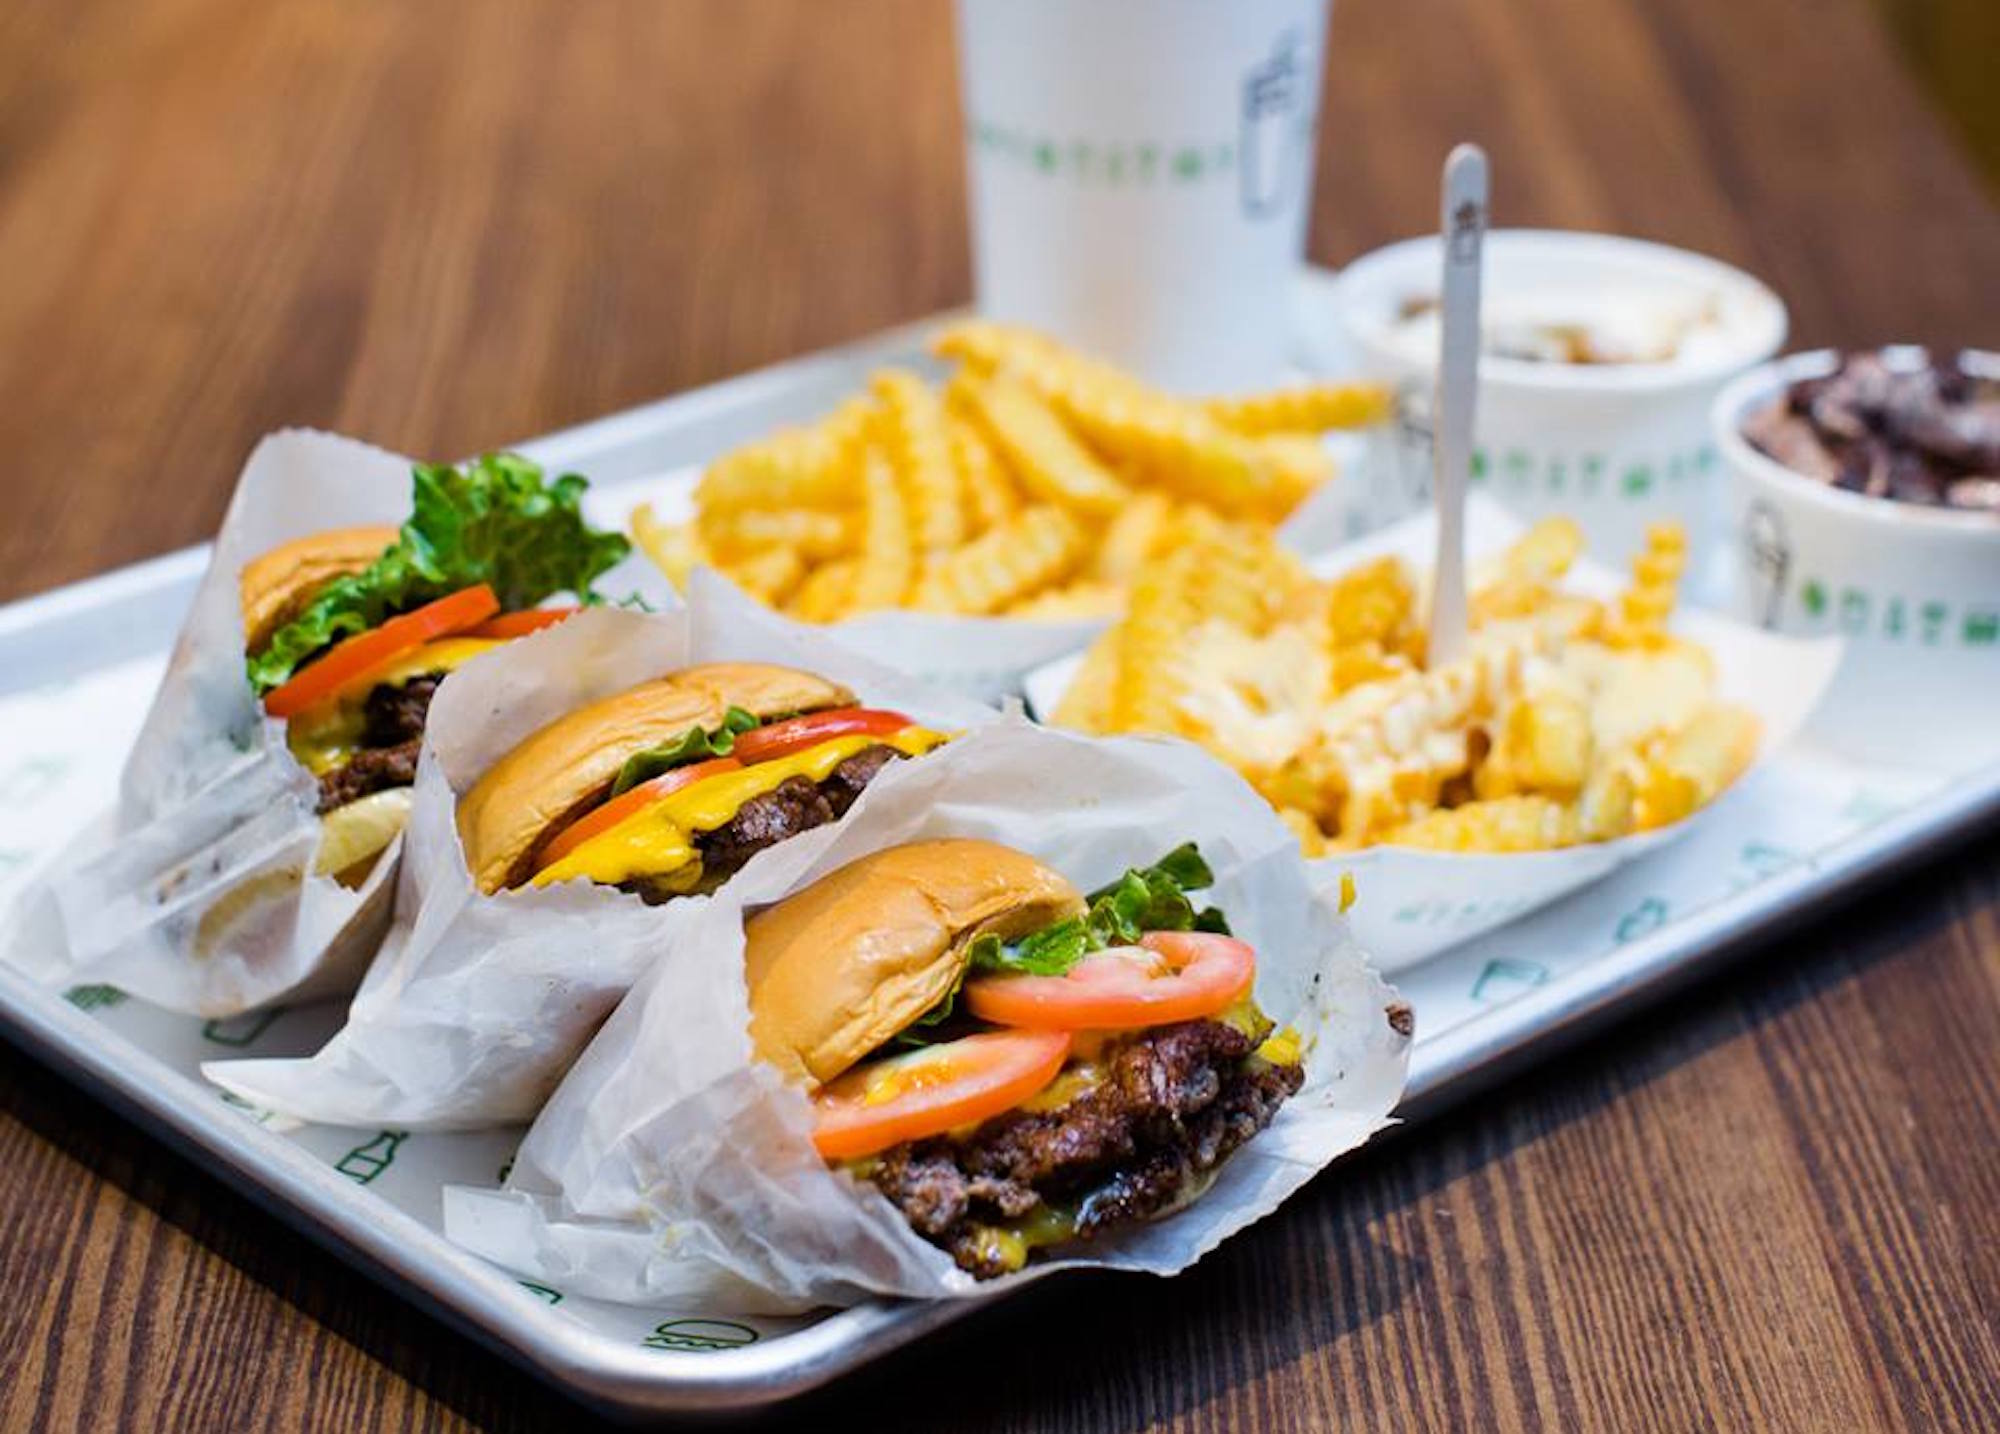 5 items to try when Shake Shack lands in Hong Kong